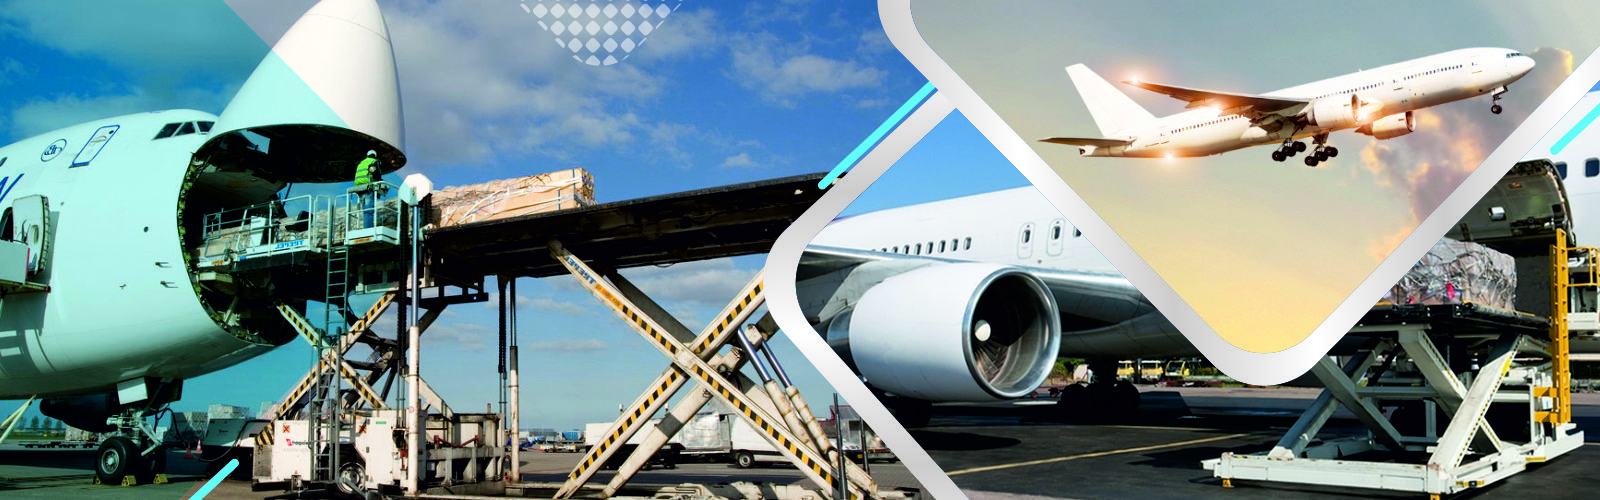 Air Cargo Airline  Flexible & Reliable Air Freight Service